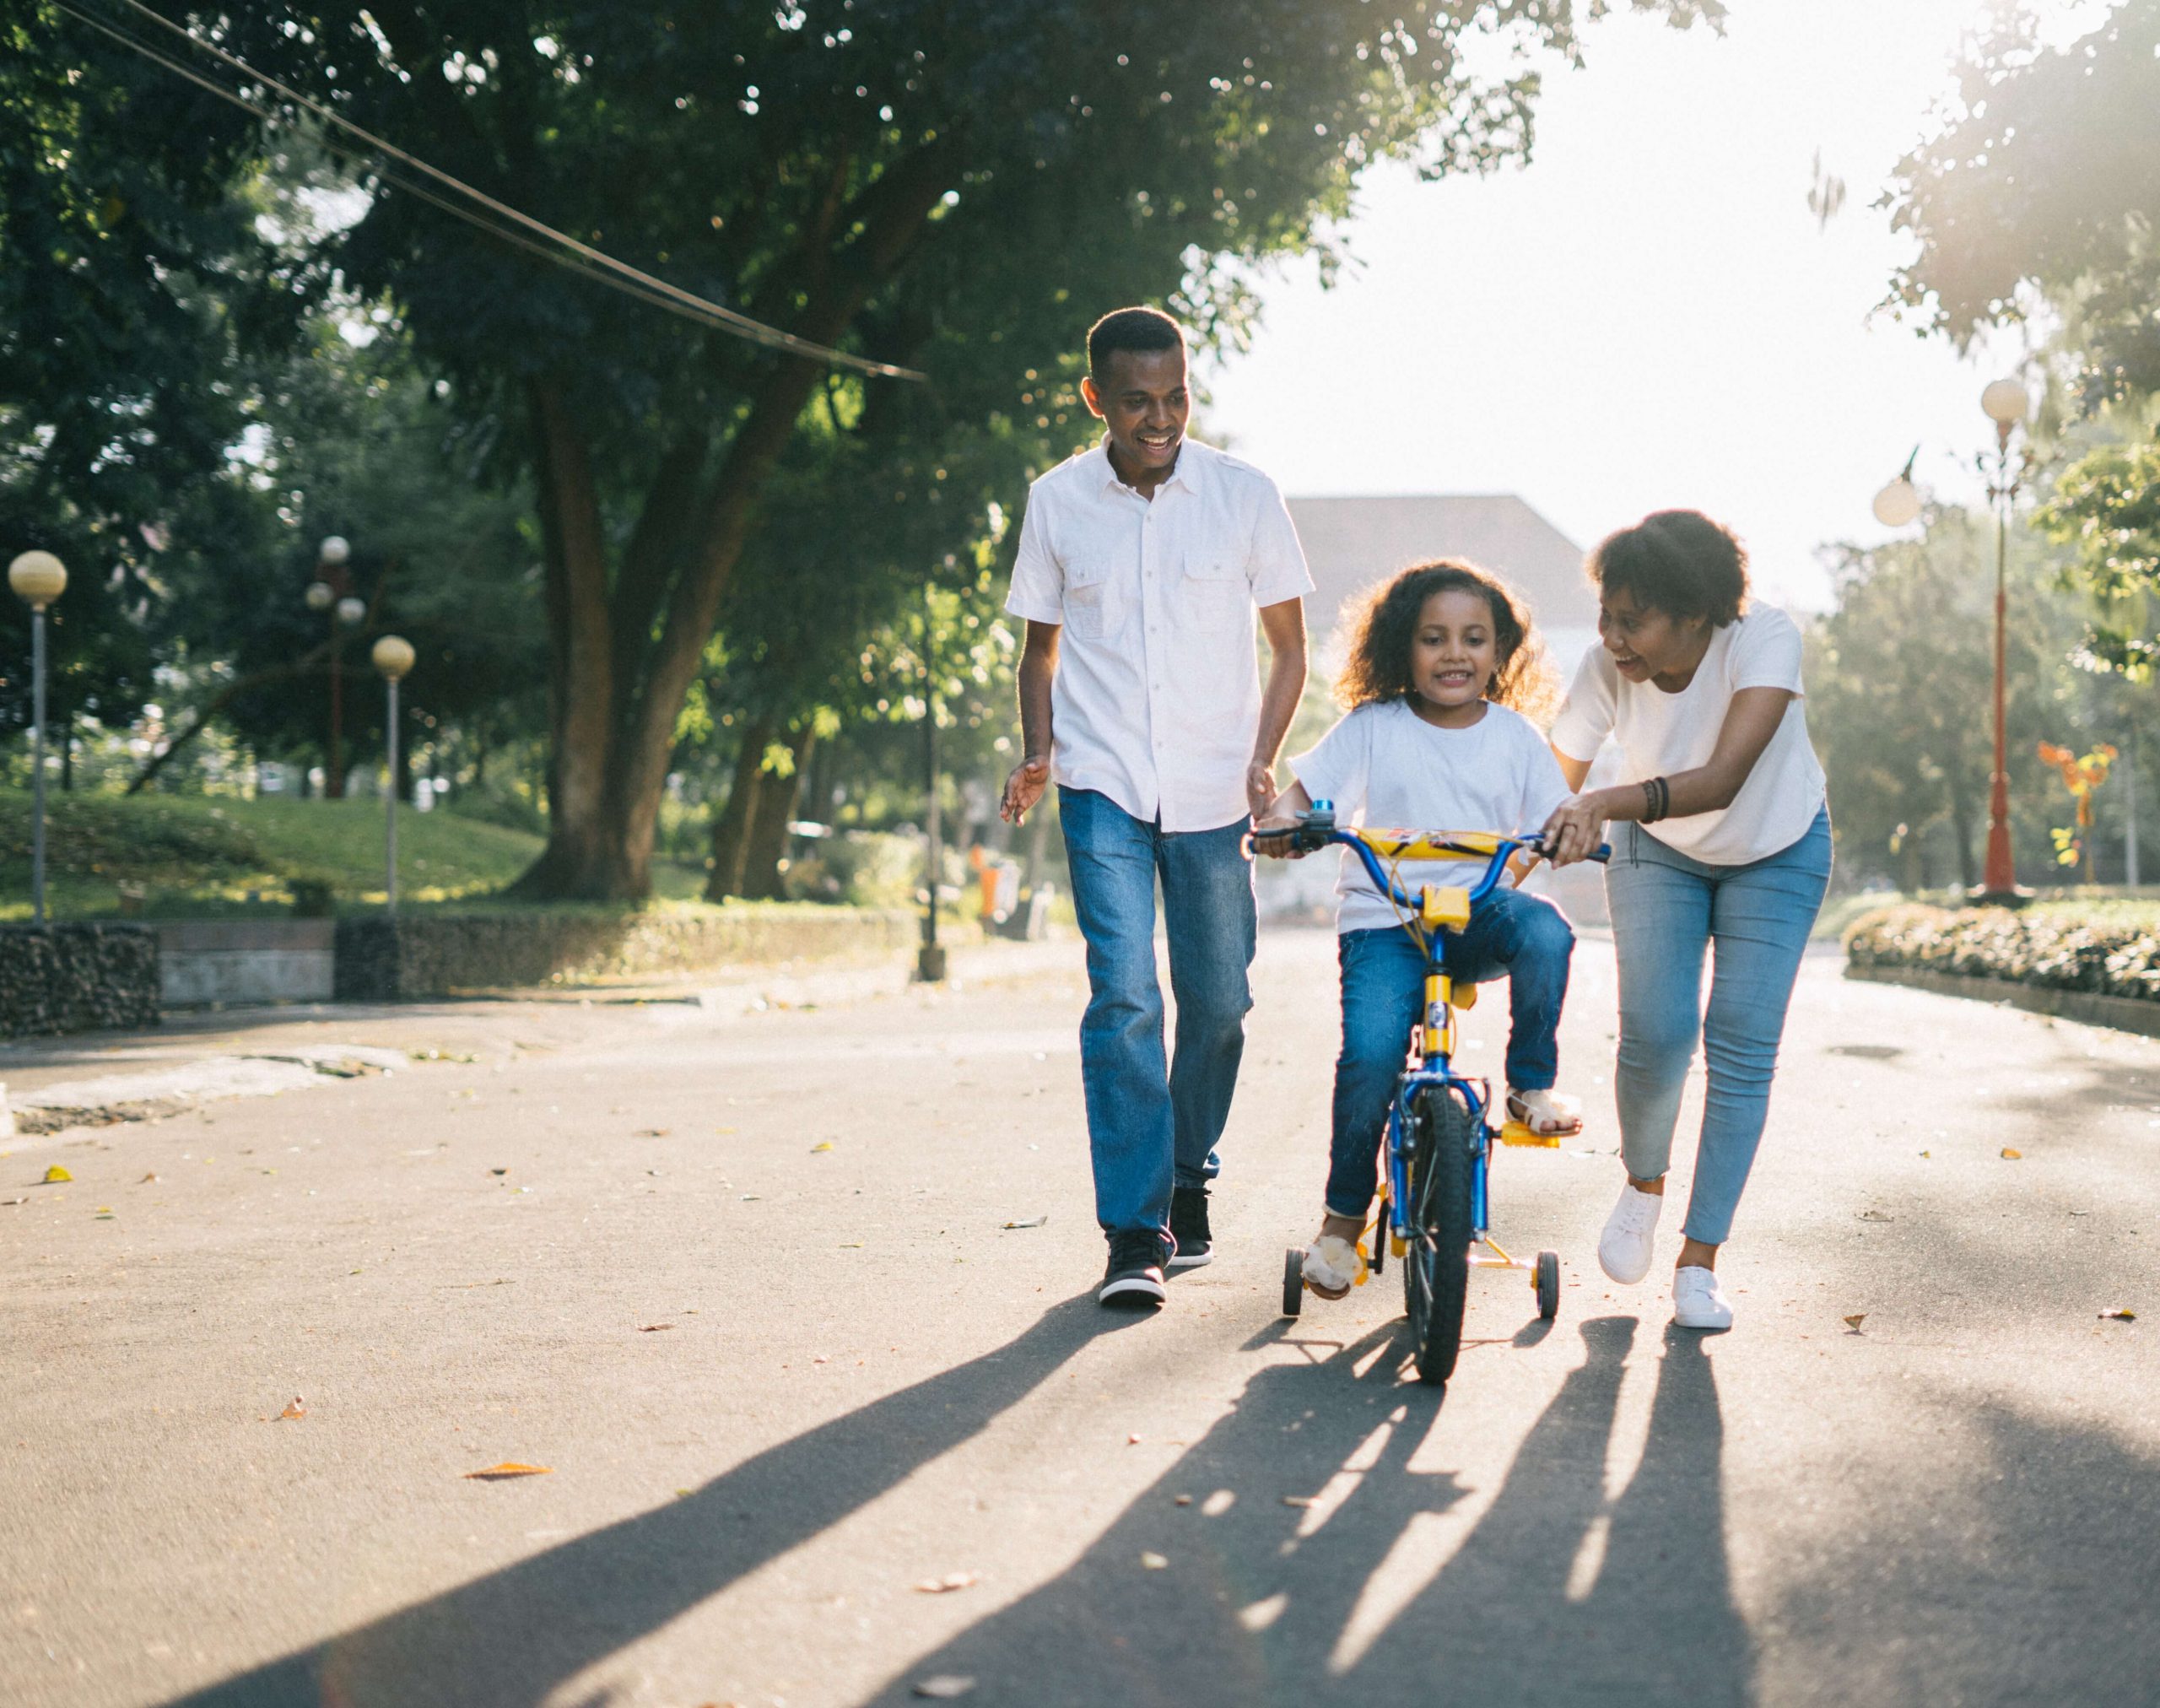 Parents teaching their child on how to ride a bike in a mobile home park community